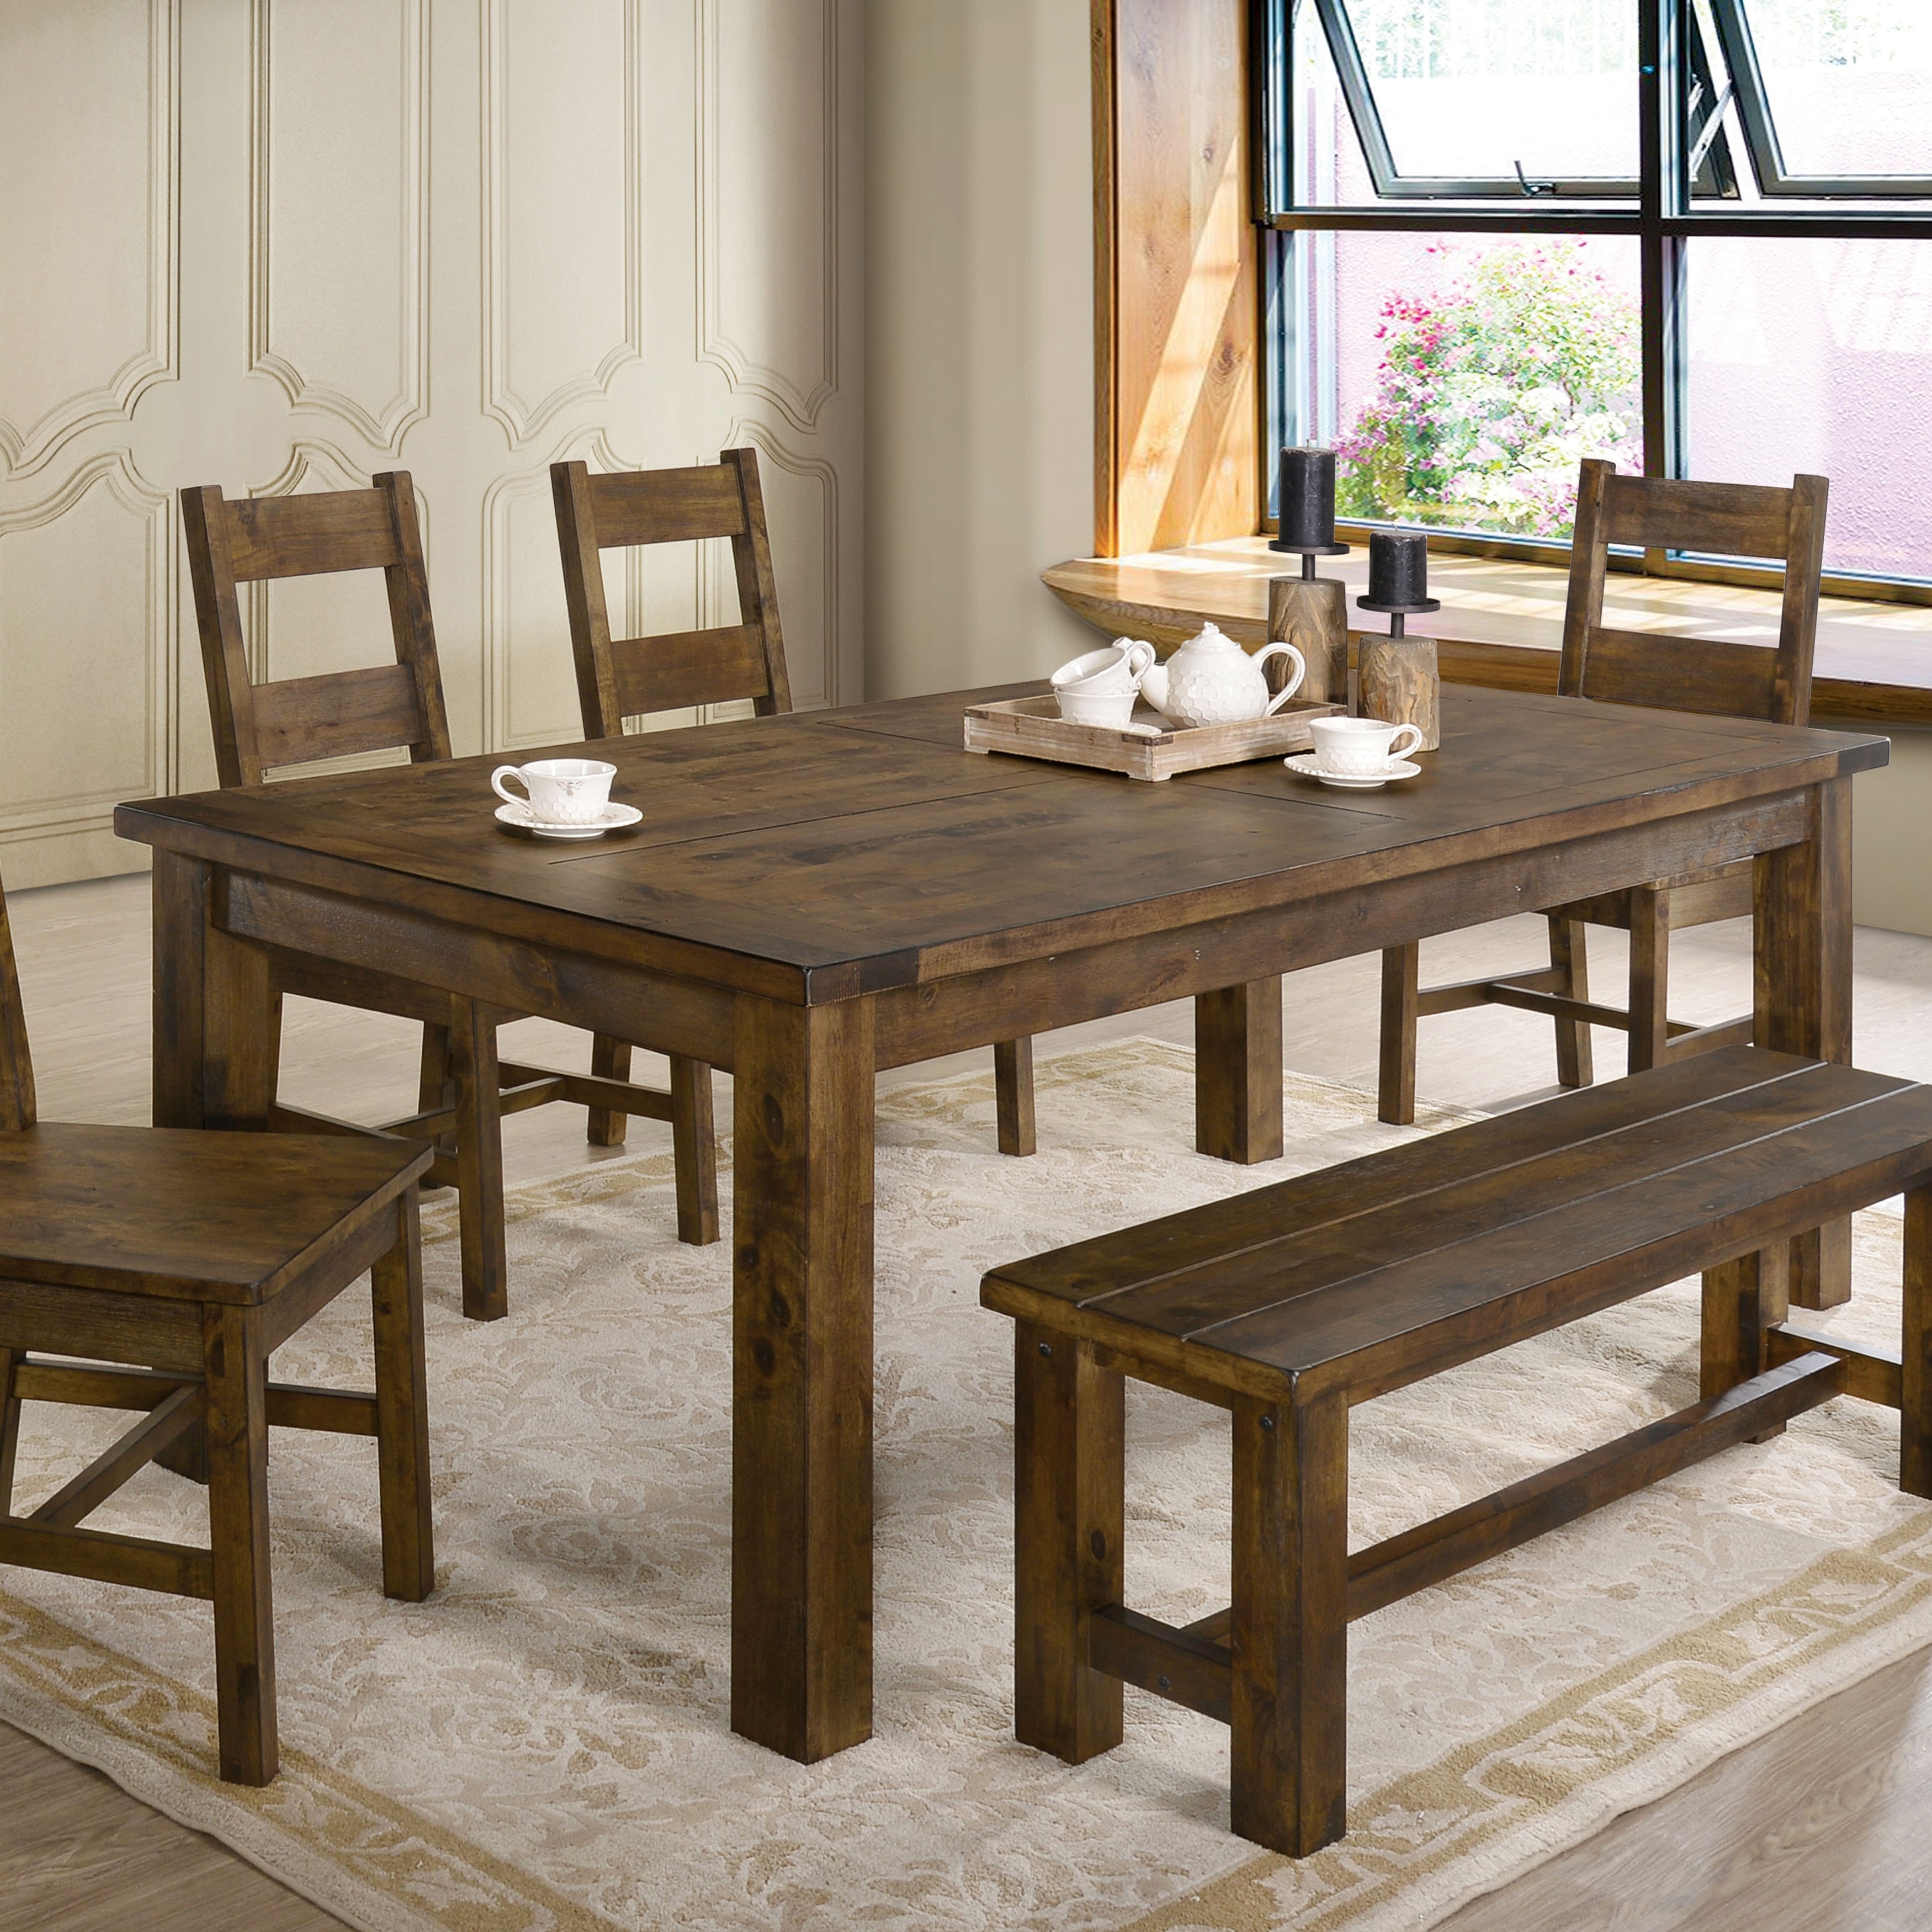 Carbon Loft Glamdring Rustic Dining Table Overstock 23570117